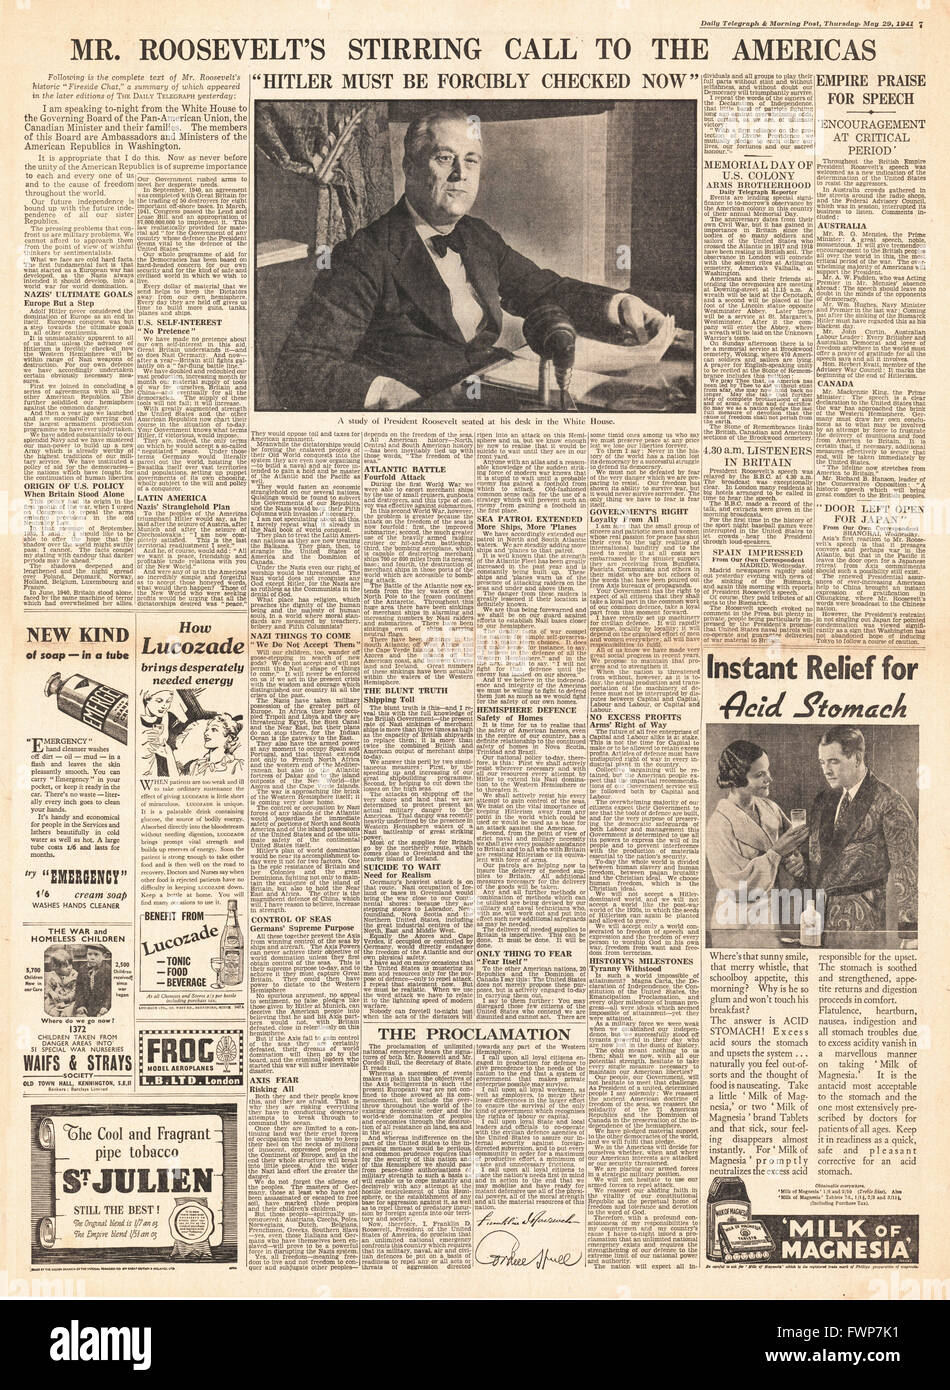 1941 page 7 Daily Telegraph Roosevelt speech America prepared for action Stock Photo